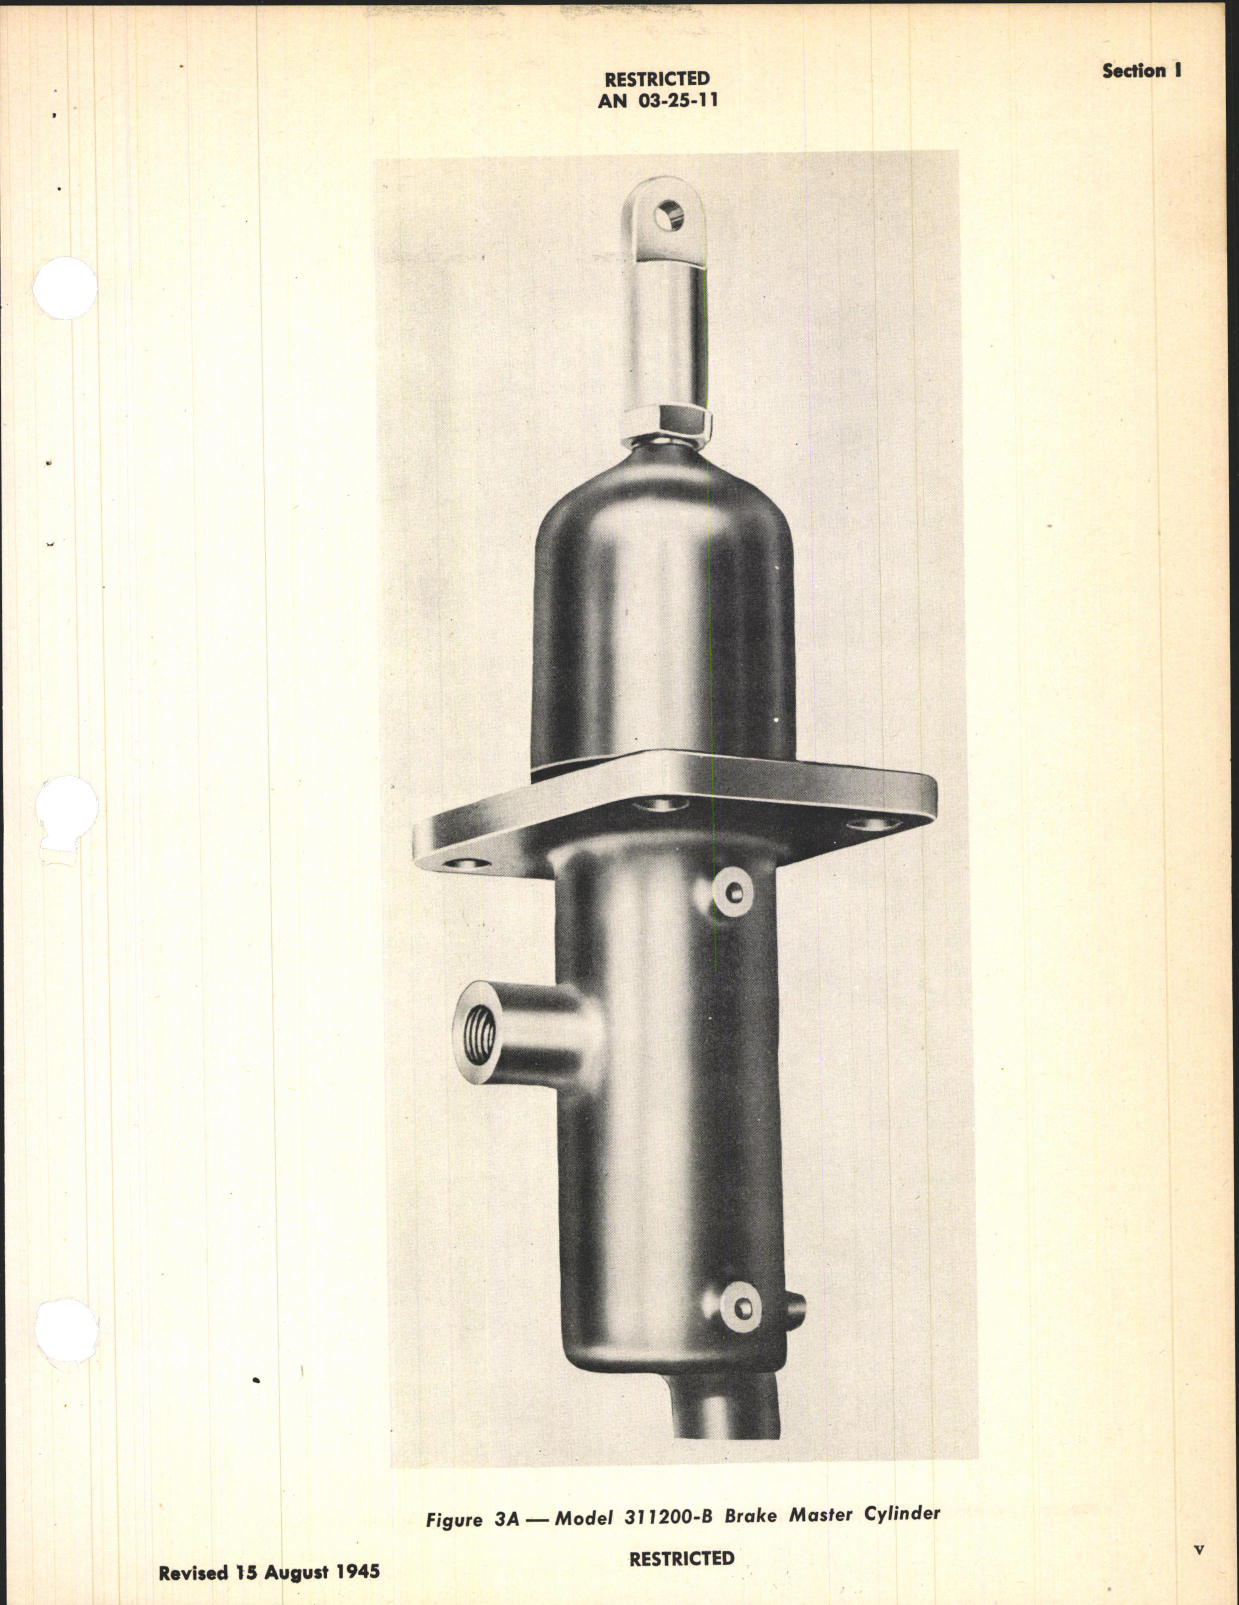 Sample page 7 from AirCorps Library document: Overhaul Instructions with Parts Catalog for Brake Master Cylinders